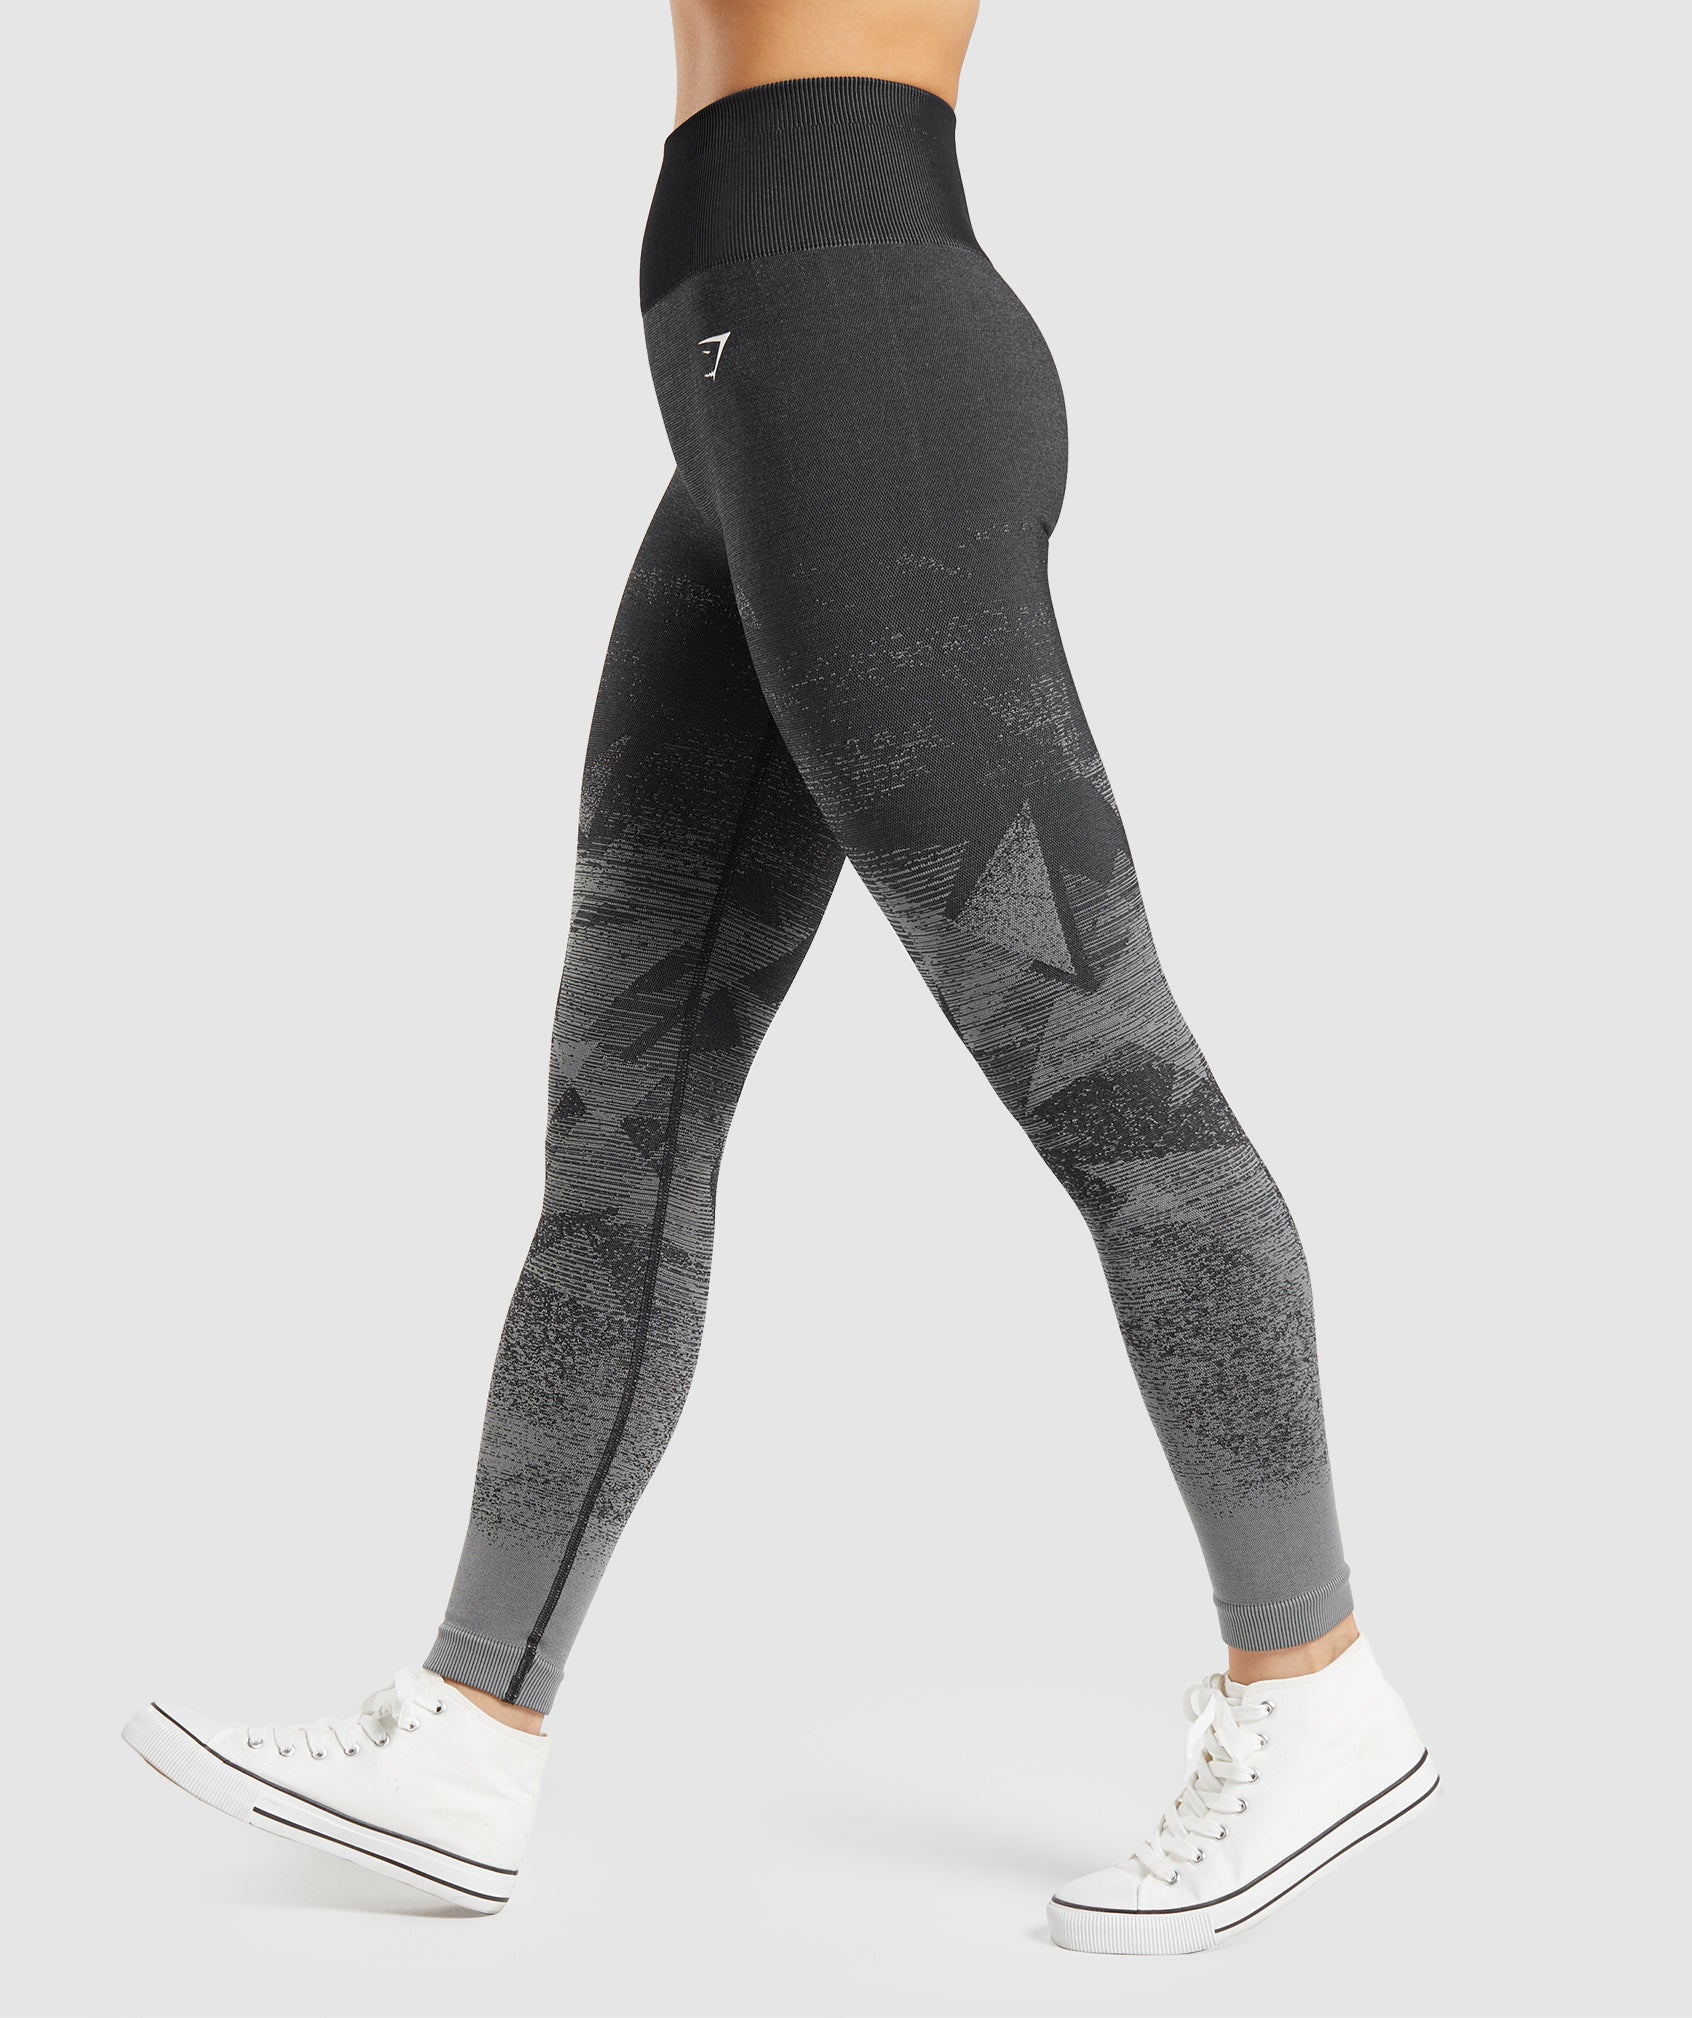 Gymshark ADAPT OMBRE SEAMLESS LEGGINGS Black Size M - $50 New With